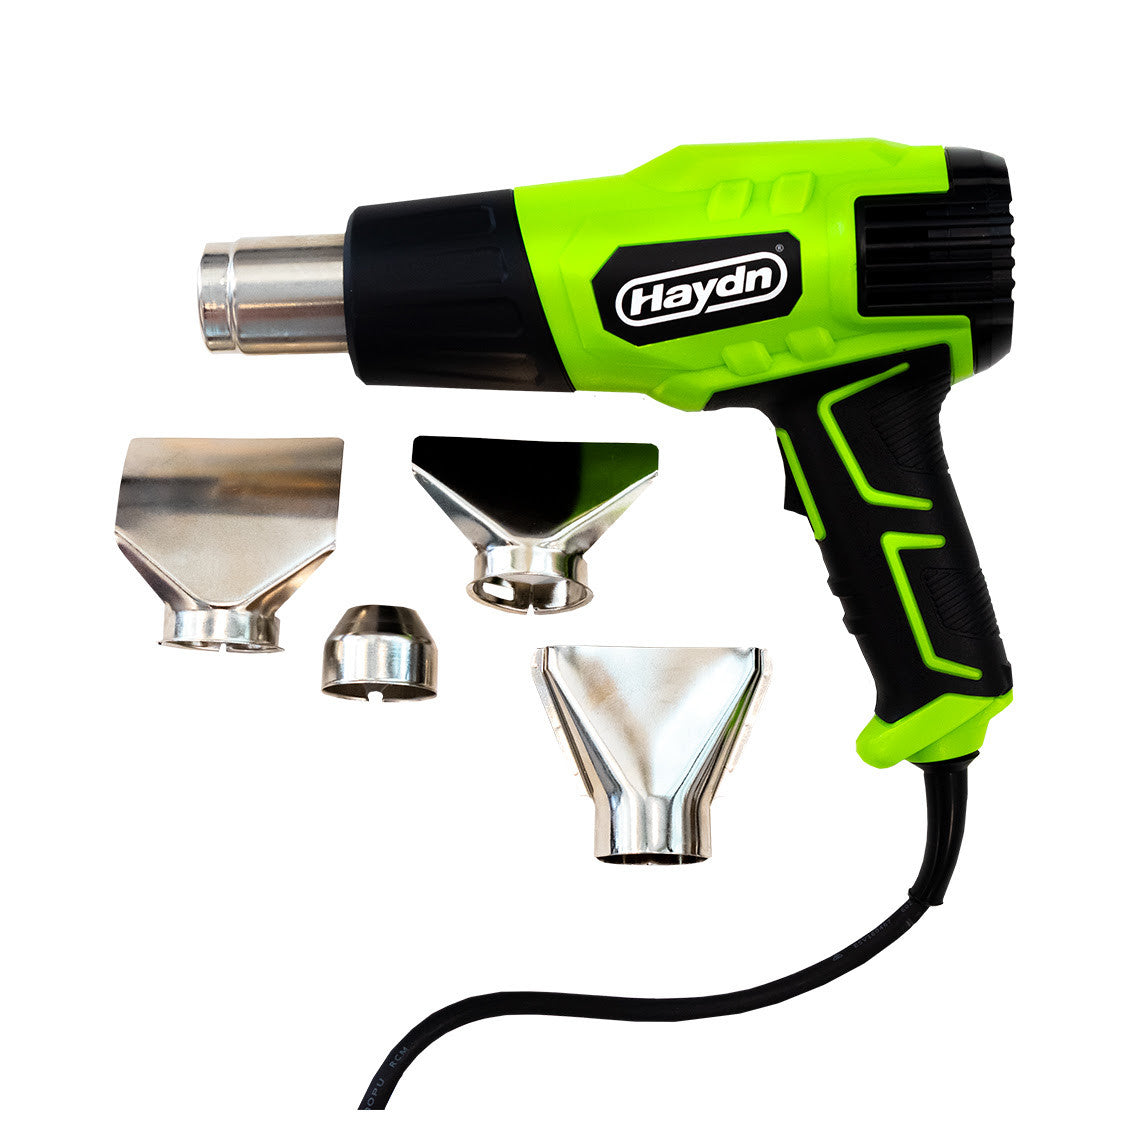 Haydn Heat Gun comes with a range of Nozzle Accessories